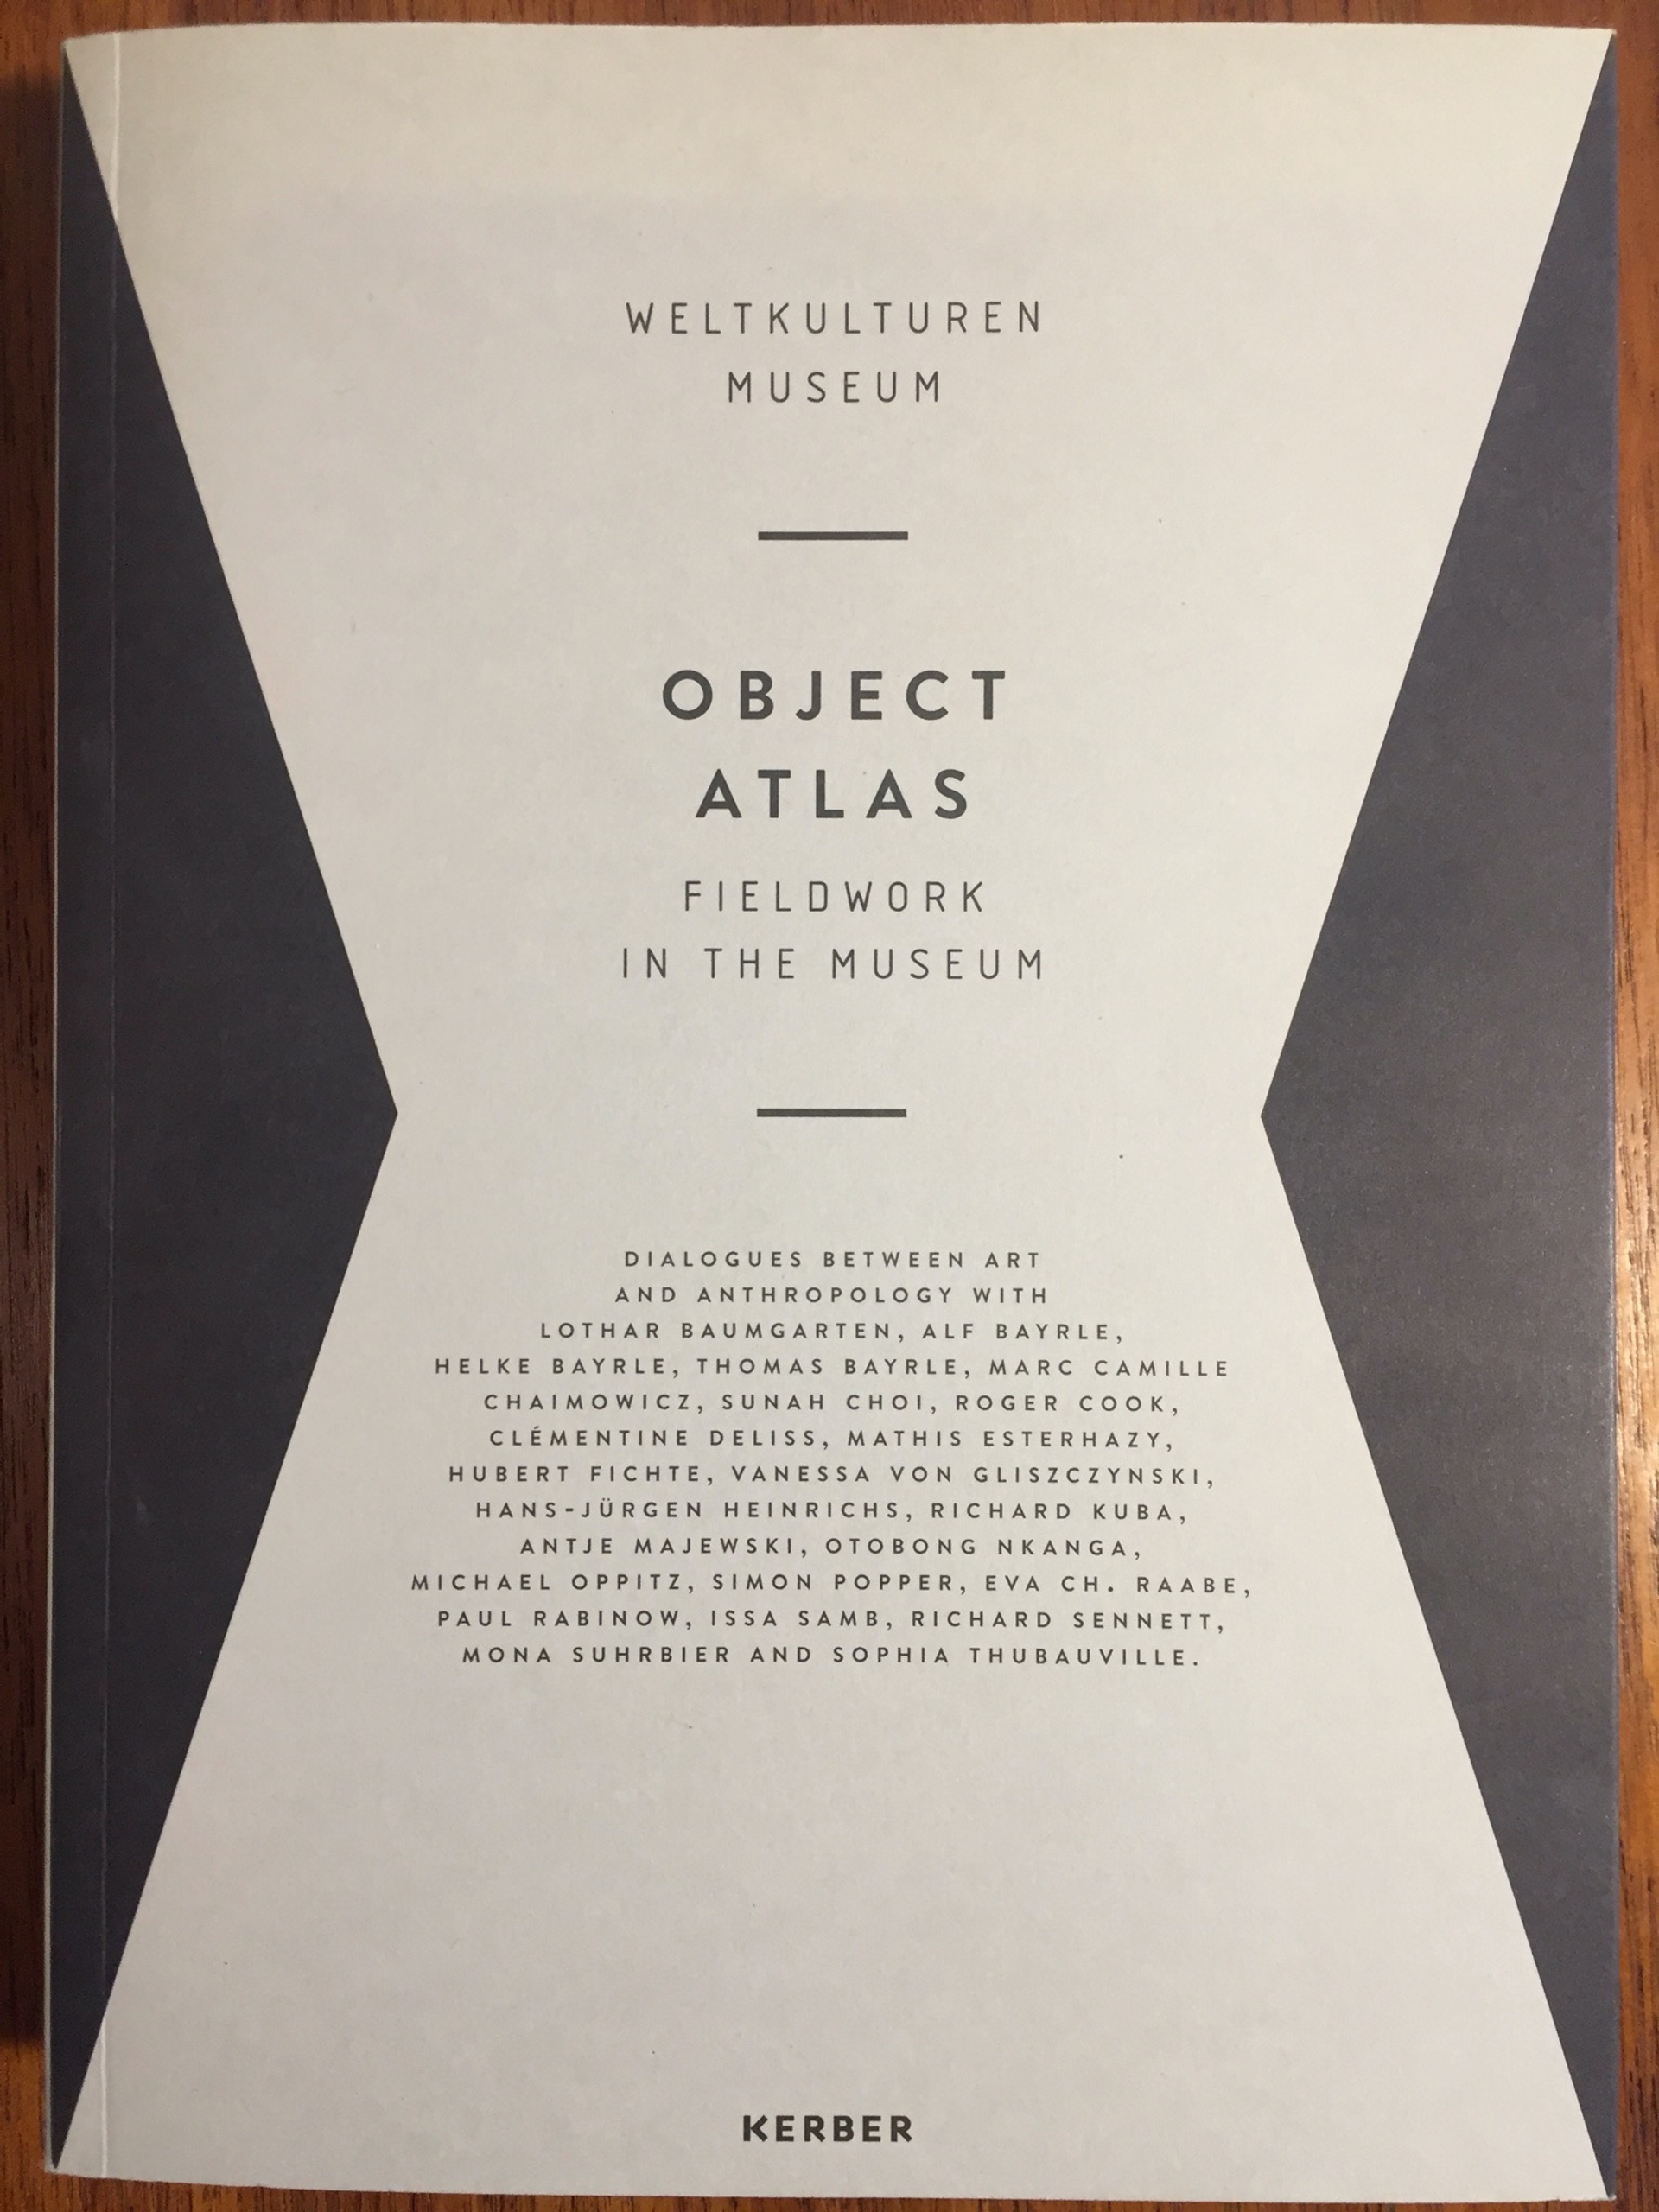 Cover of “Object Atlas. Fieldwork in the Museum”, edited by Clémentine Deliss, Kerber, Bielefeld 2011 (English and German editions)